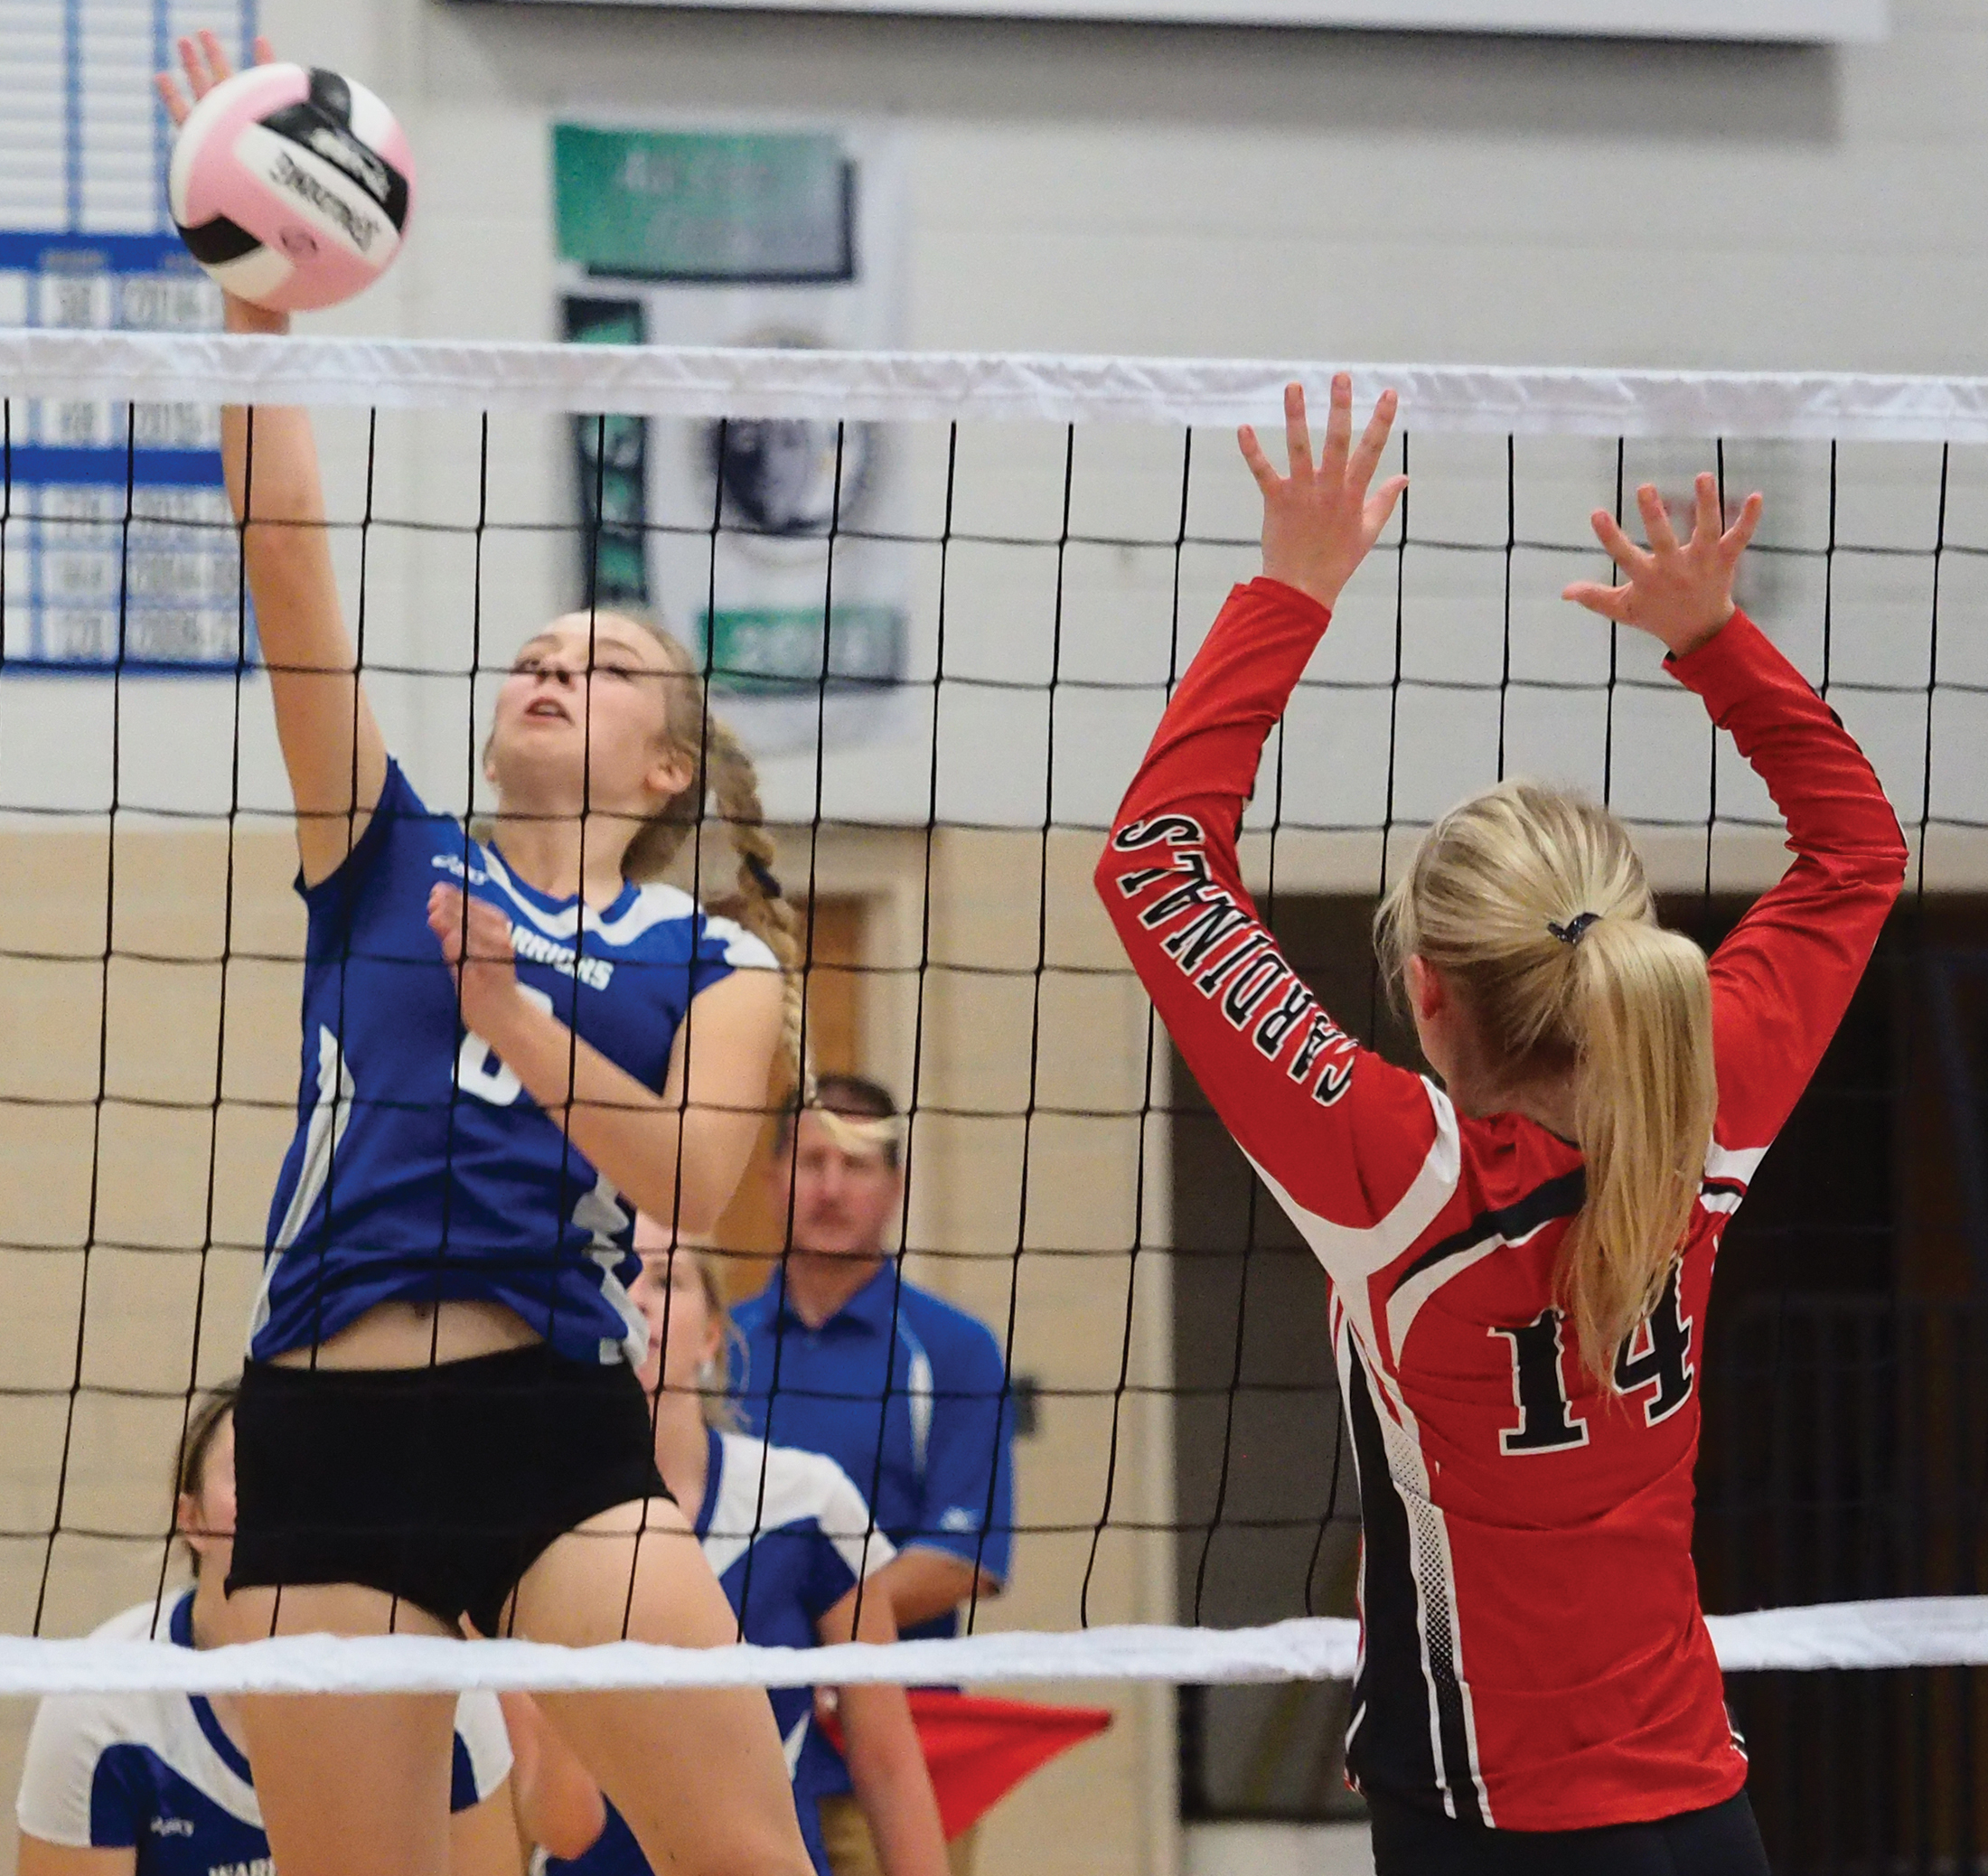 Rockford wins second-straight VB match with 3-1 win over GHV